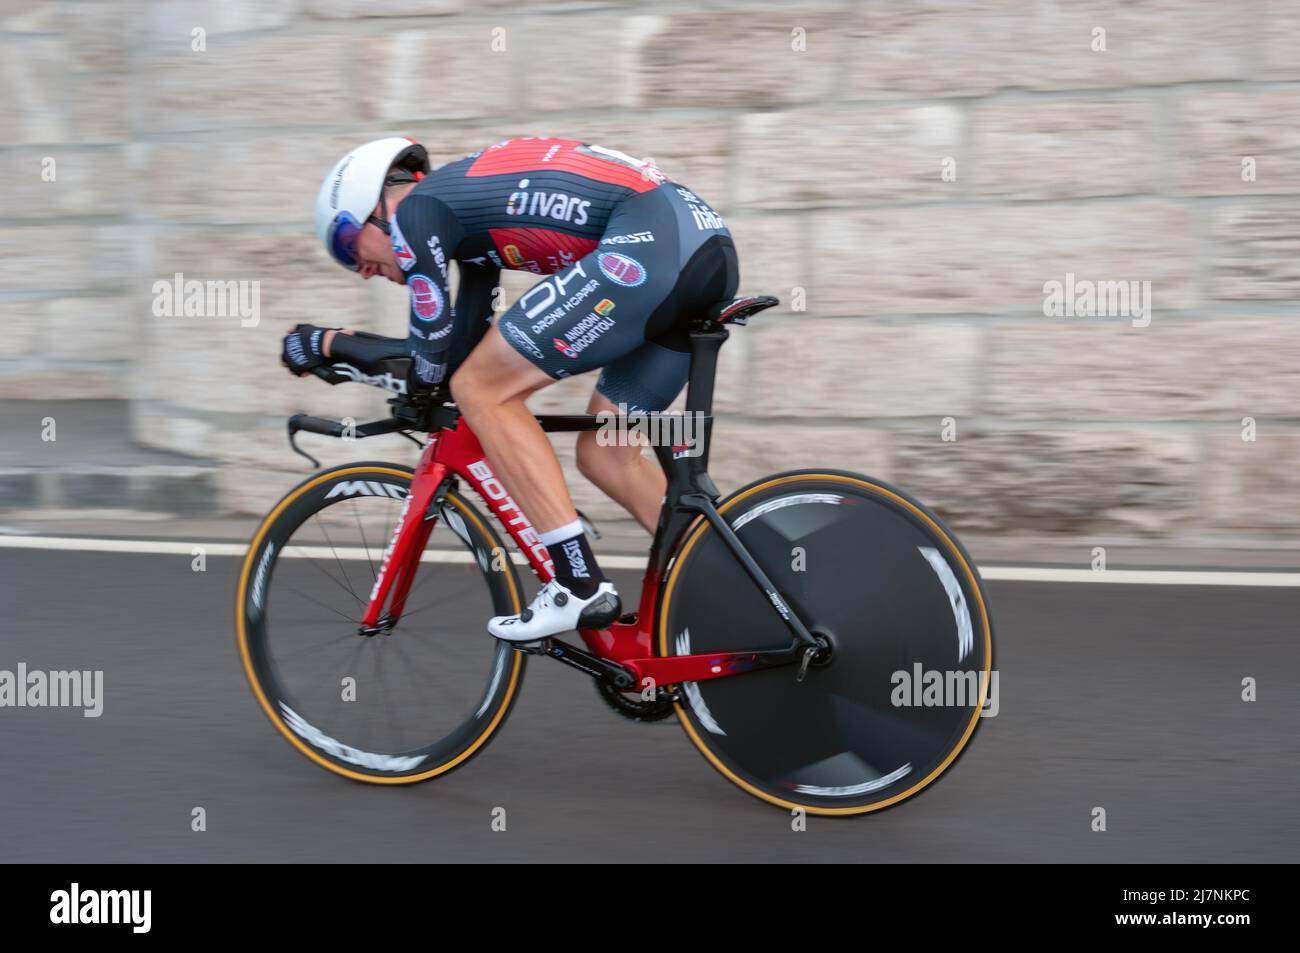 BUDAPEST, HUNGARY - MAY 07, 2022: Pro cyclist Mattia Bais DRONE HOPPER - ANDRONI GIOCATTOLI, Giro D'Italia Stage 2 Time trial - cycling competition on Stock Photo